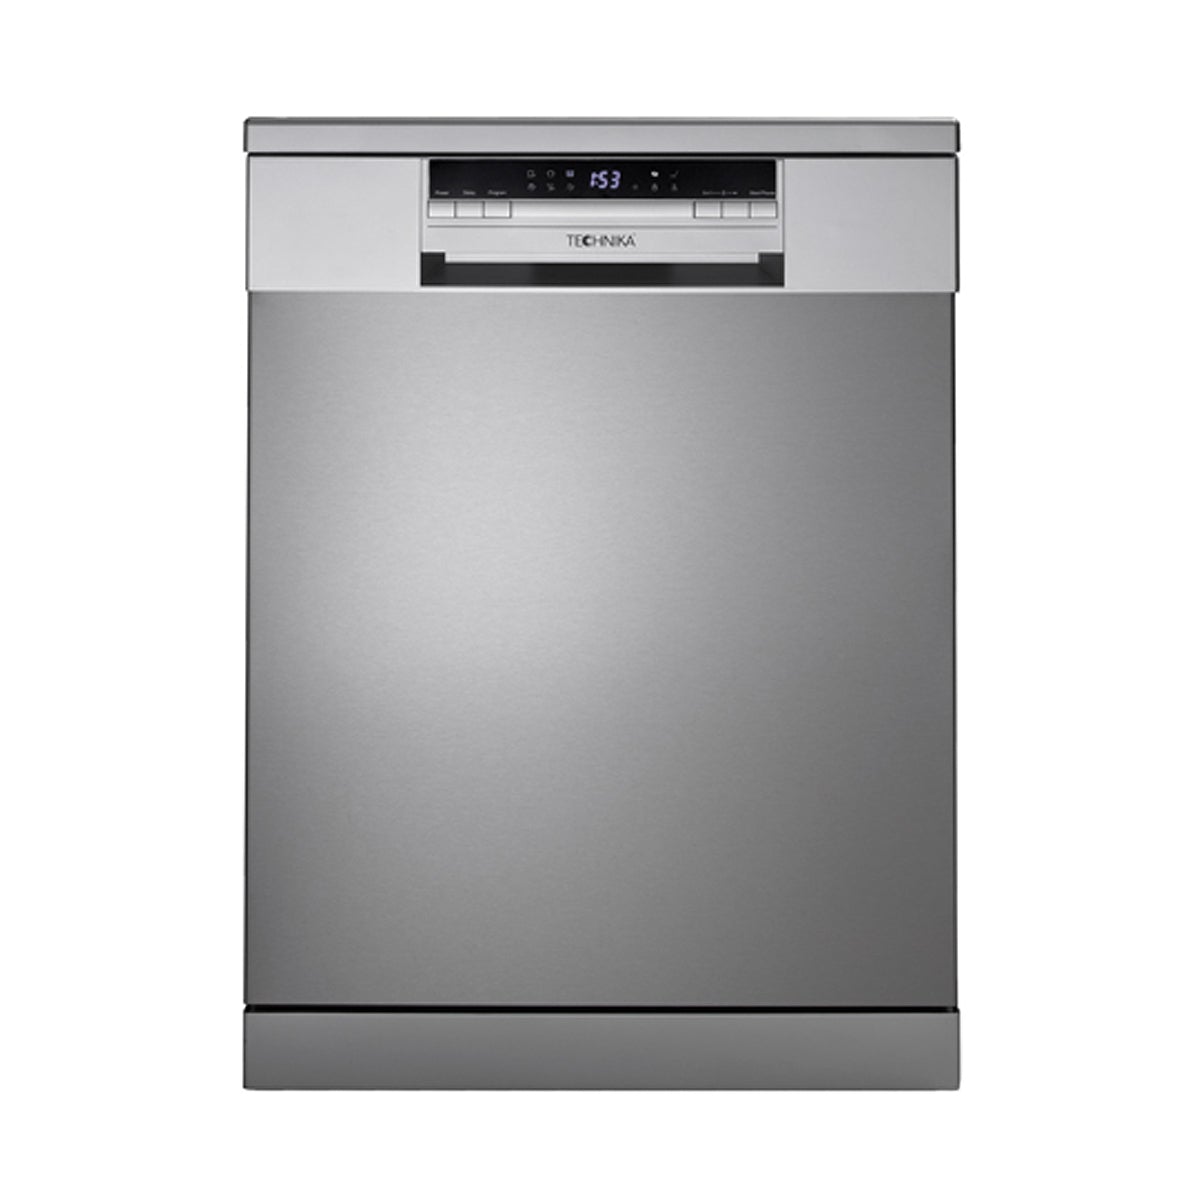 Technika TGDW6SS Stainless Steel Dishwasher with Top Cutlery Draw